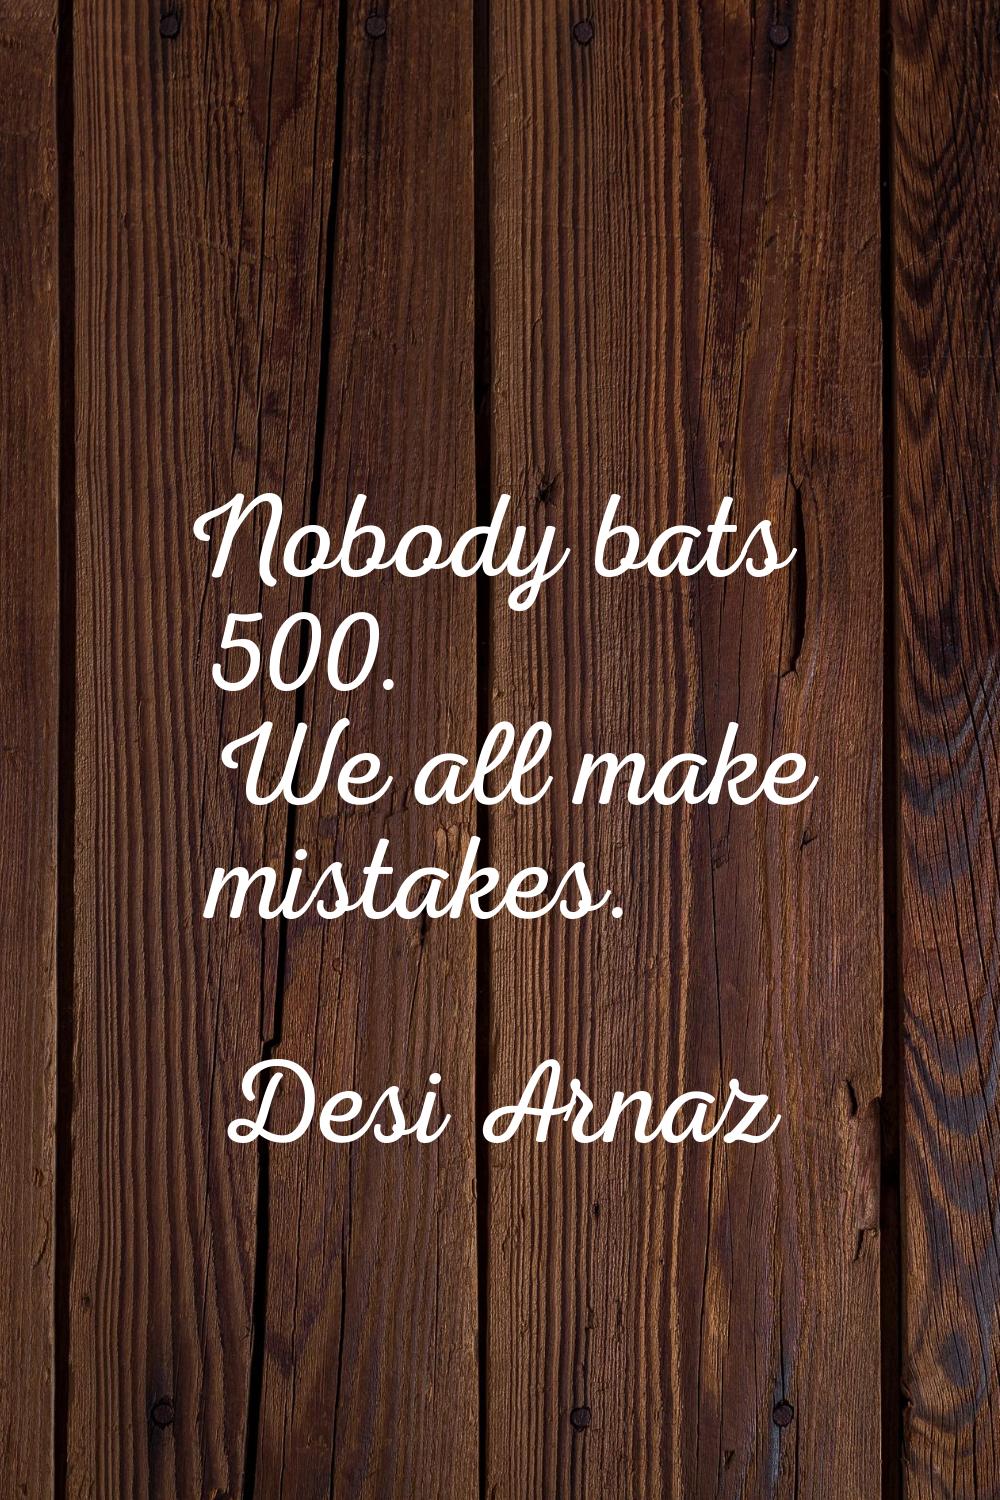 Nobody bats 500. We all make mistakes.